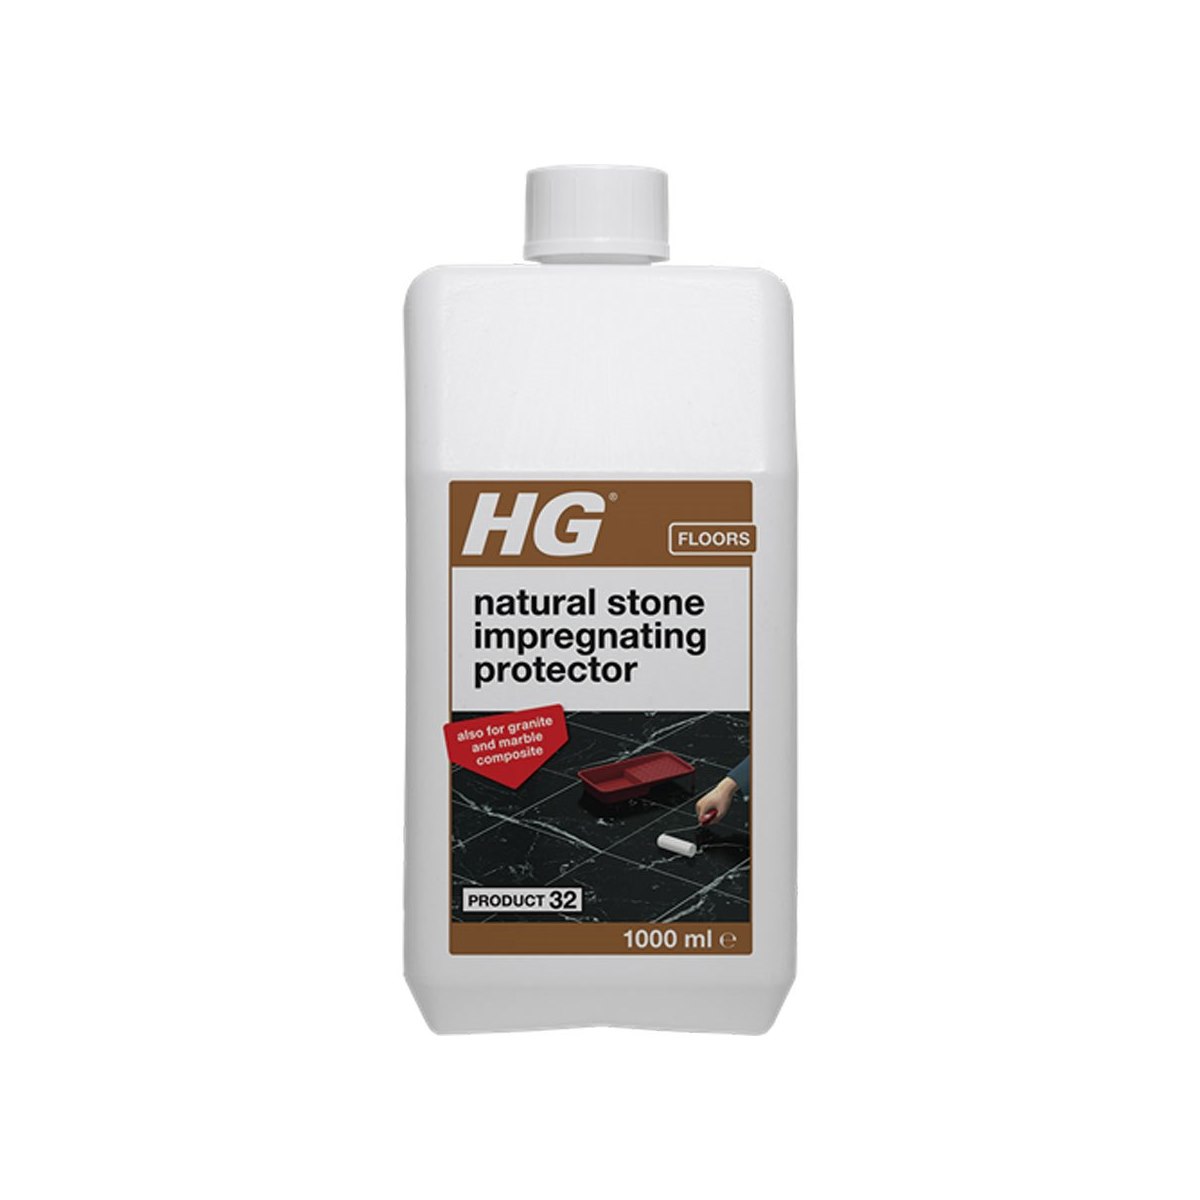 HG Natural Stone impregnating Protector Product 32 1 Litre